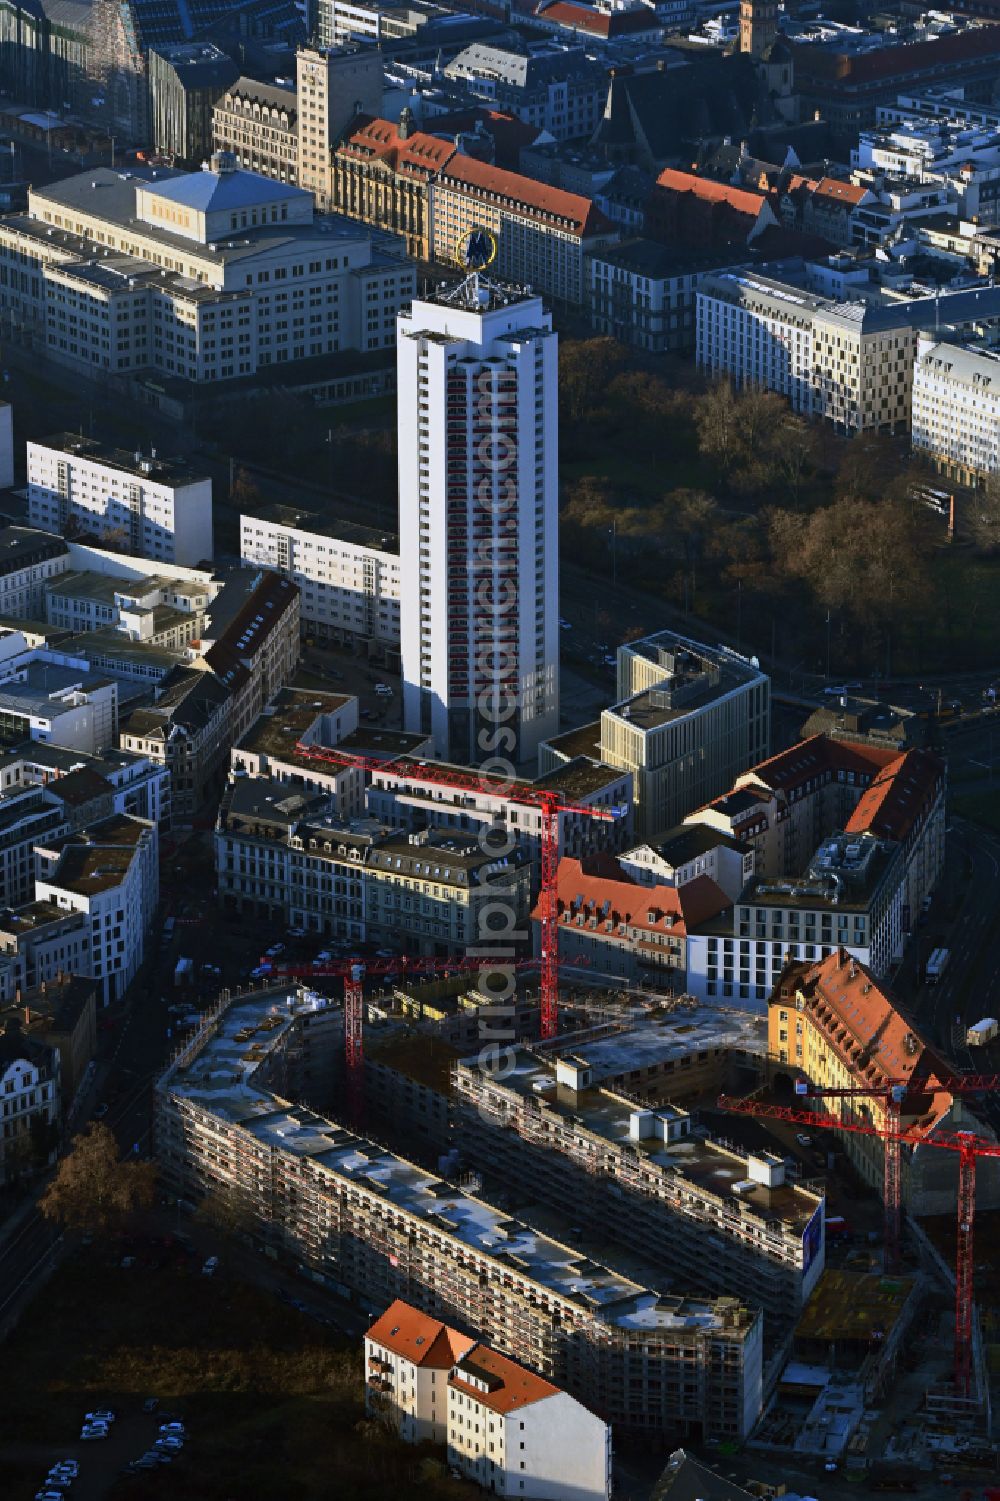 Leipzig from the bird's eye view: Construction site for City Quarters Building Krystallpalast-Areal on street Hofmeisterstrasse in the district Zentrum in Leipzig in the state Saxony, Germany